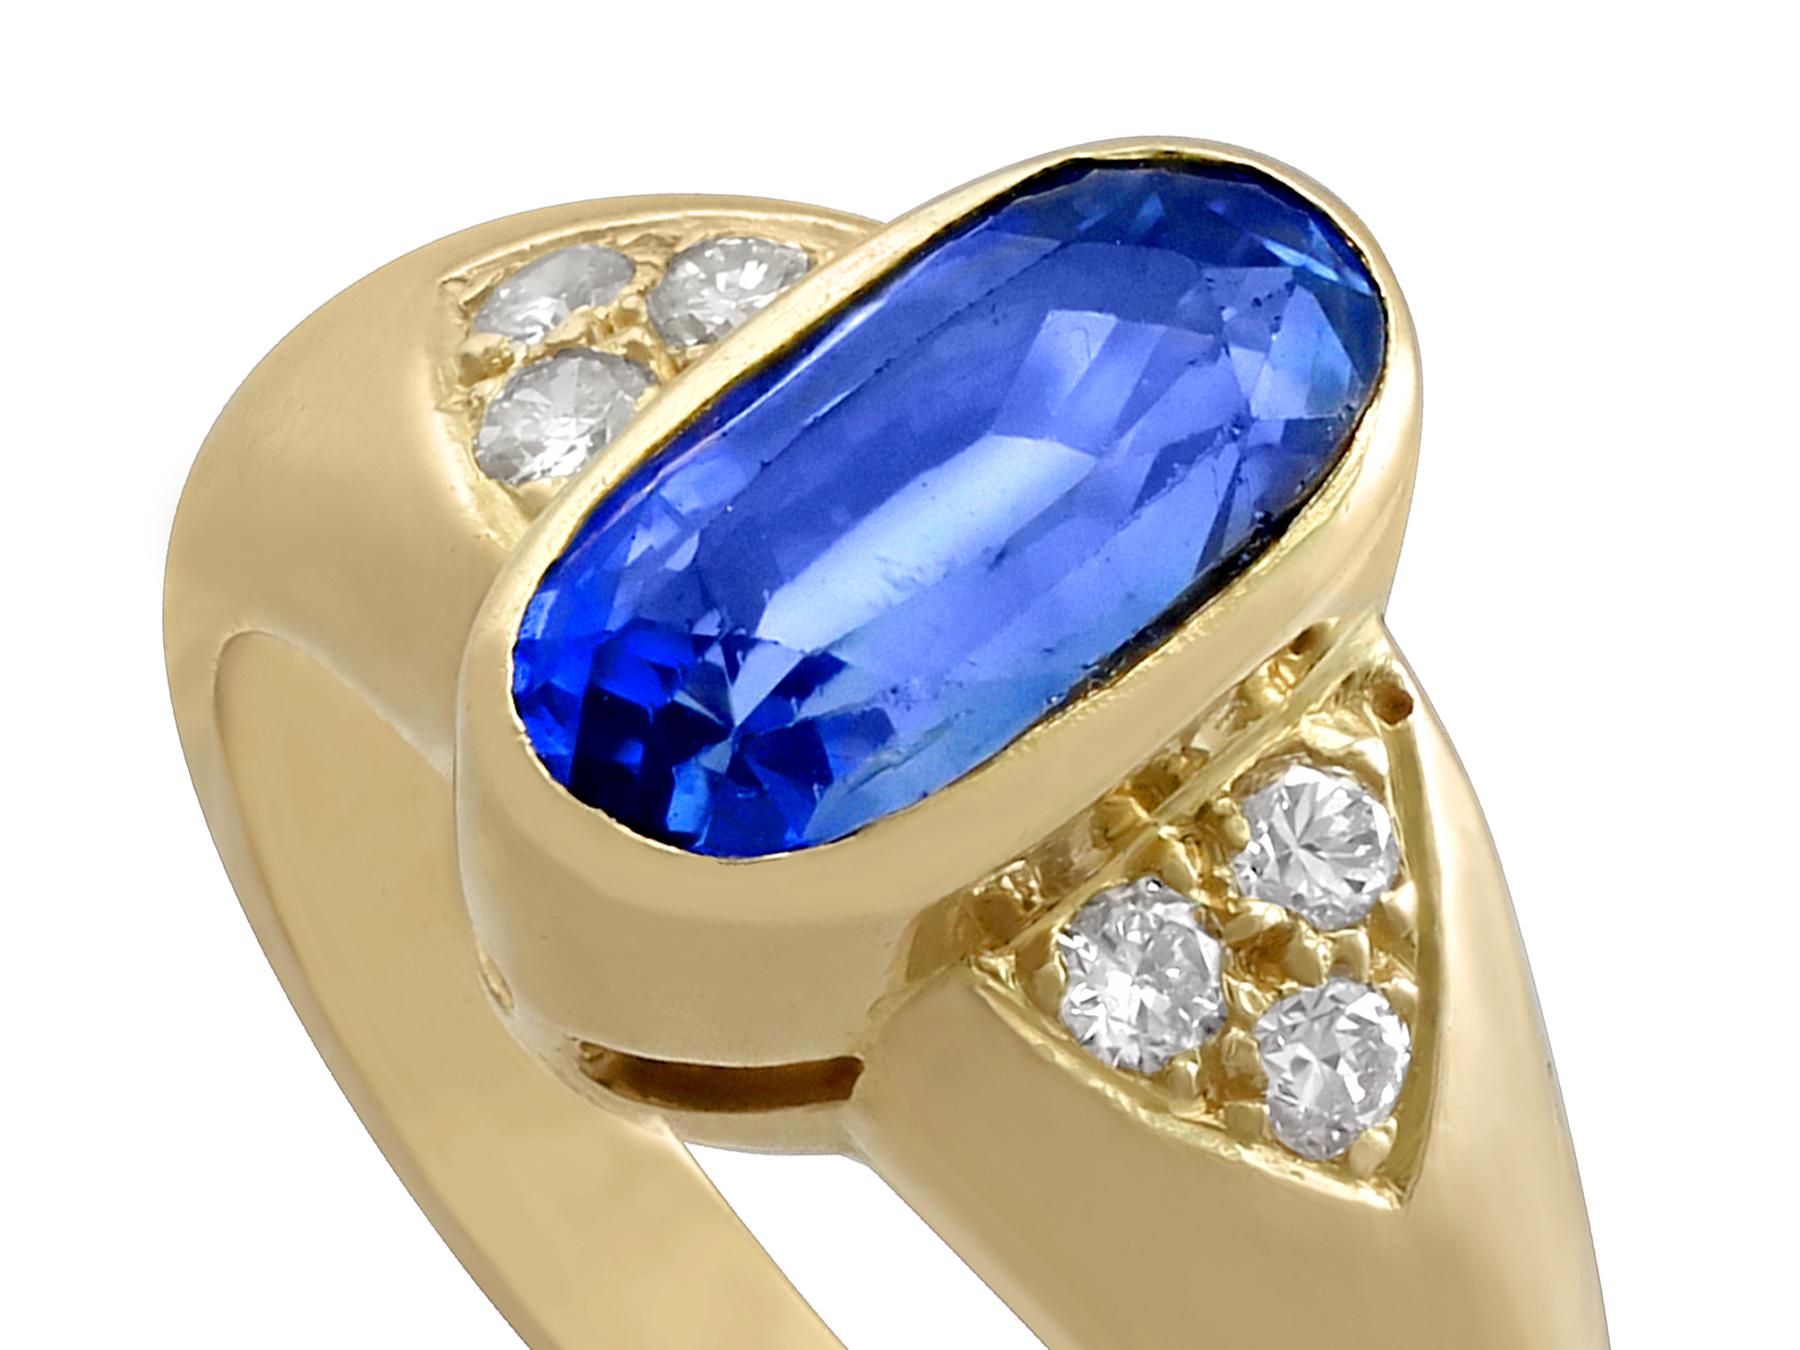 A stunning, fine and impressive vintage French 3.39 carat natural blue sapphire and 0.18 carat diamond (total) dress ring in 18 karat yellow gold; part of our vintage jewelry and estate jewelry collections.

This stunning, fine and impressive